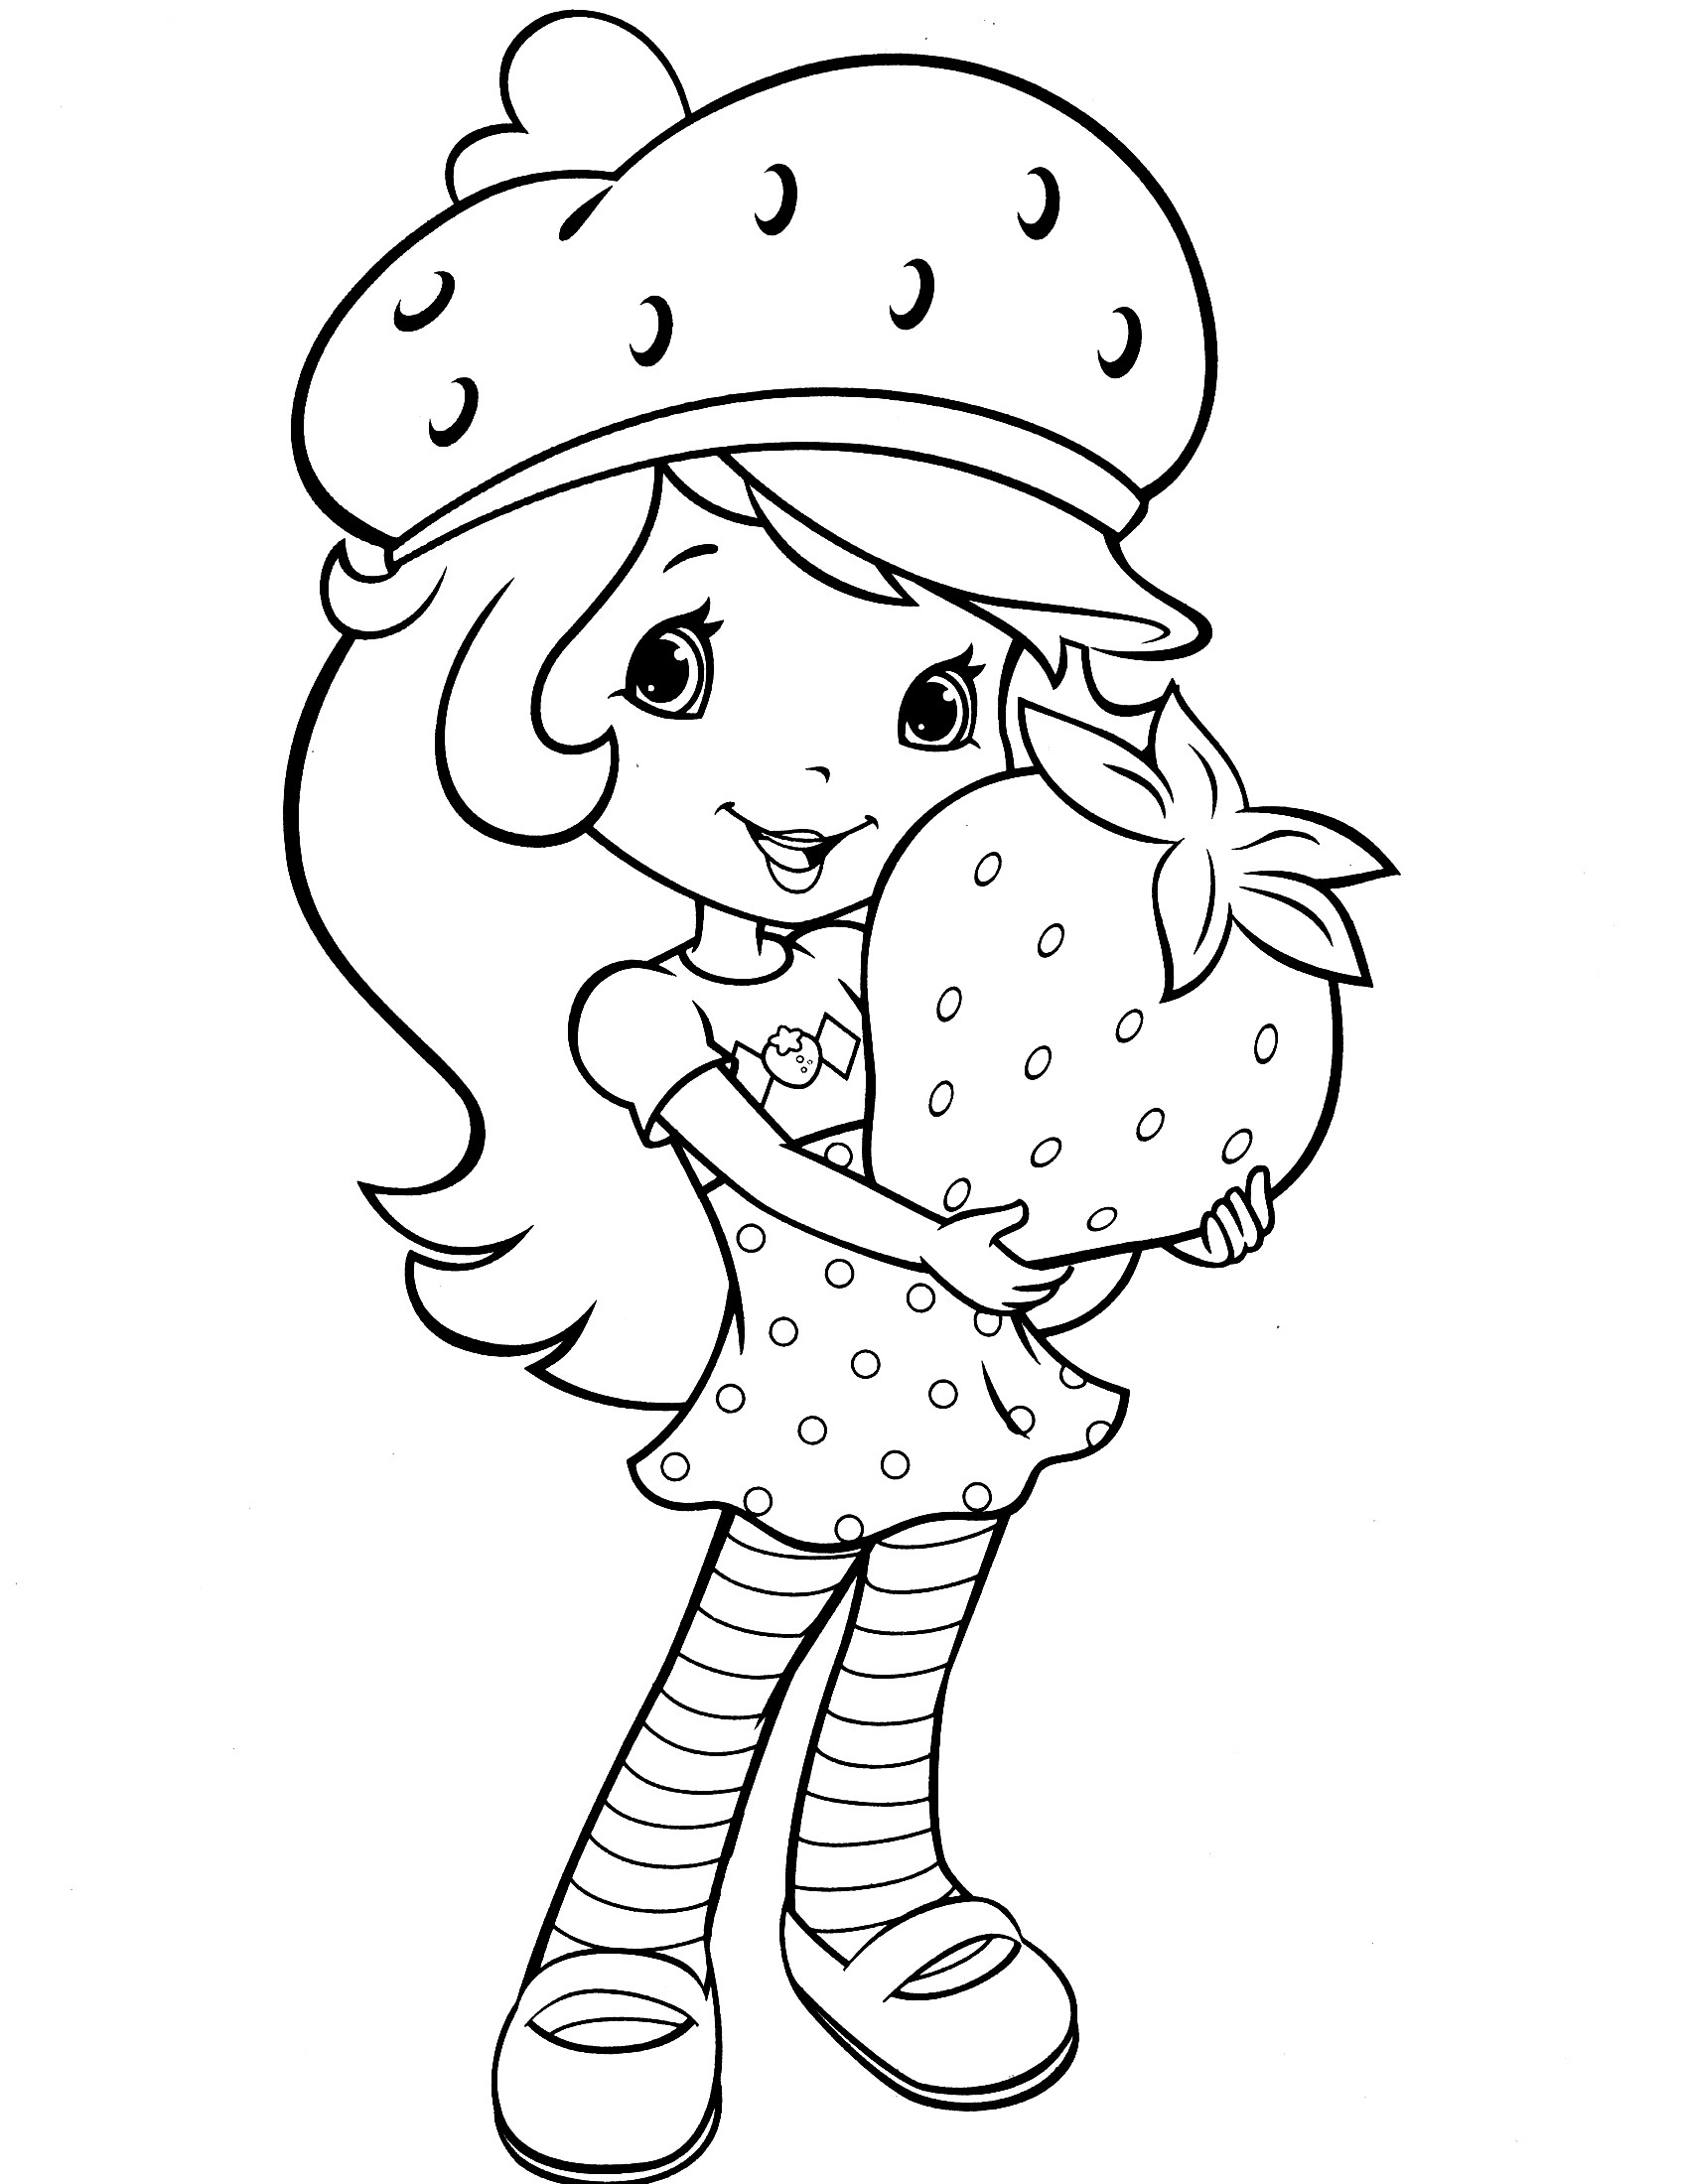 Strawberry Shortcake Printable Coloring Pages
 Strawberry Coloring Pages Best Coloring Pages For Kids